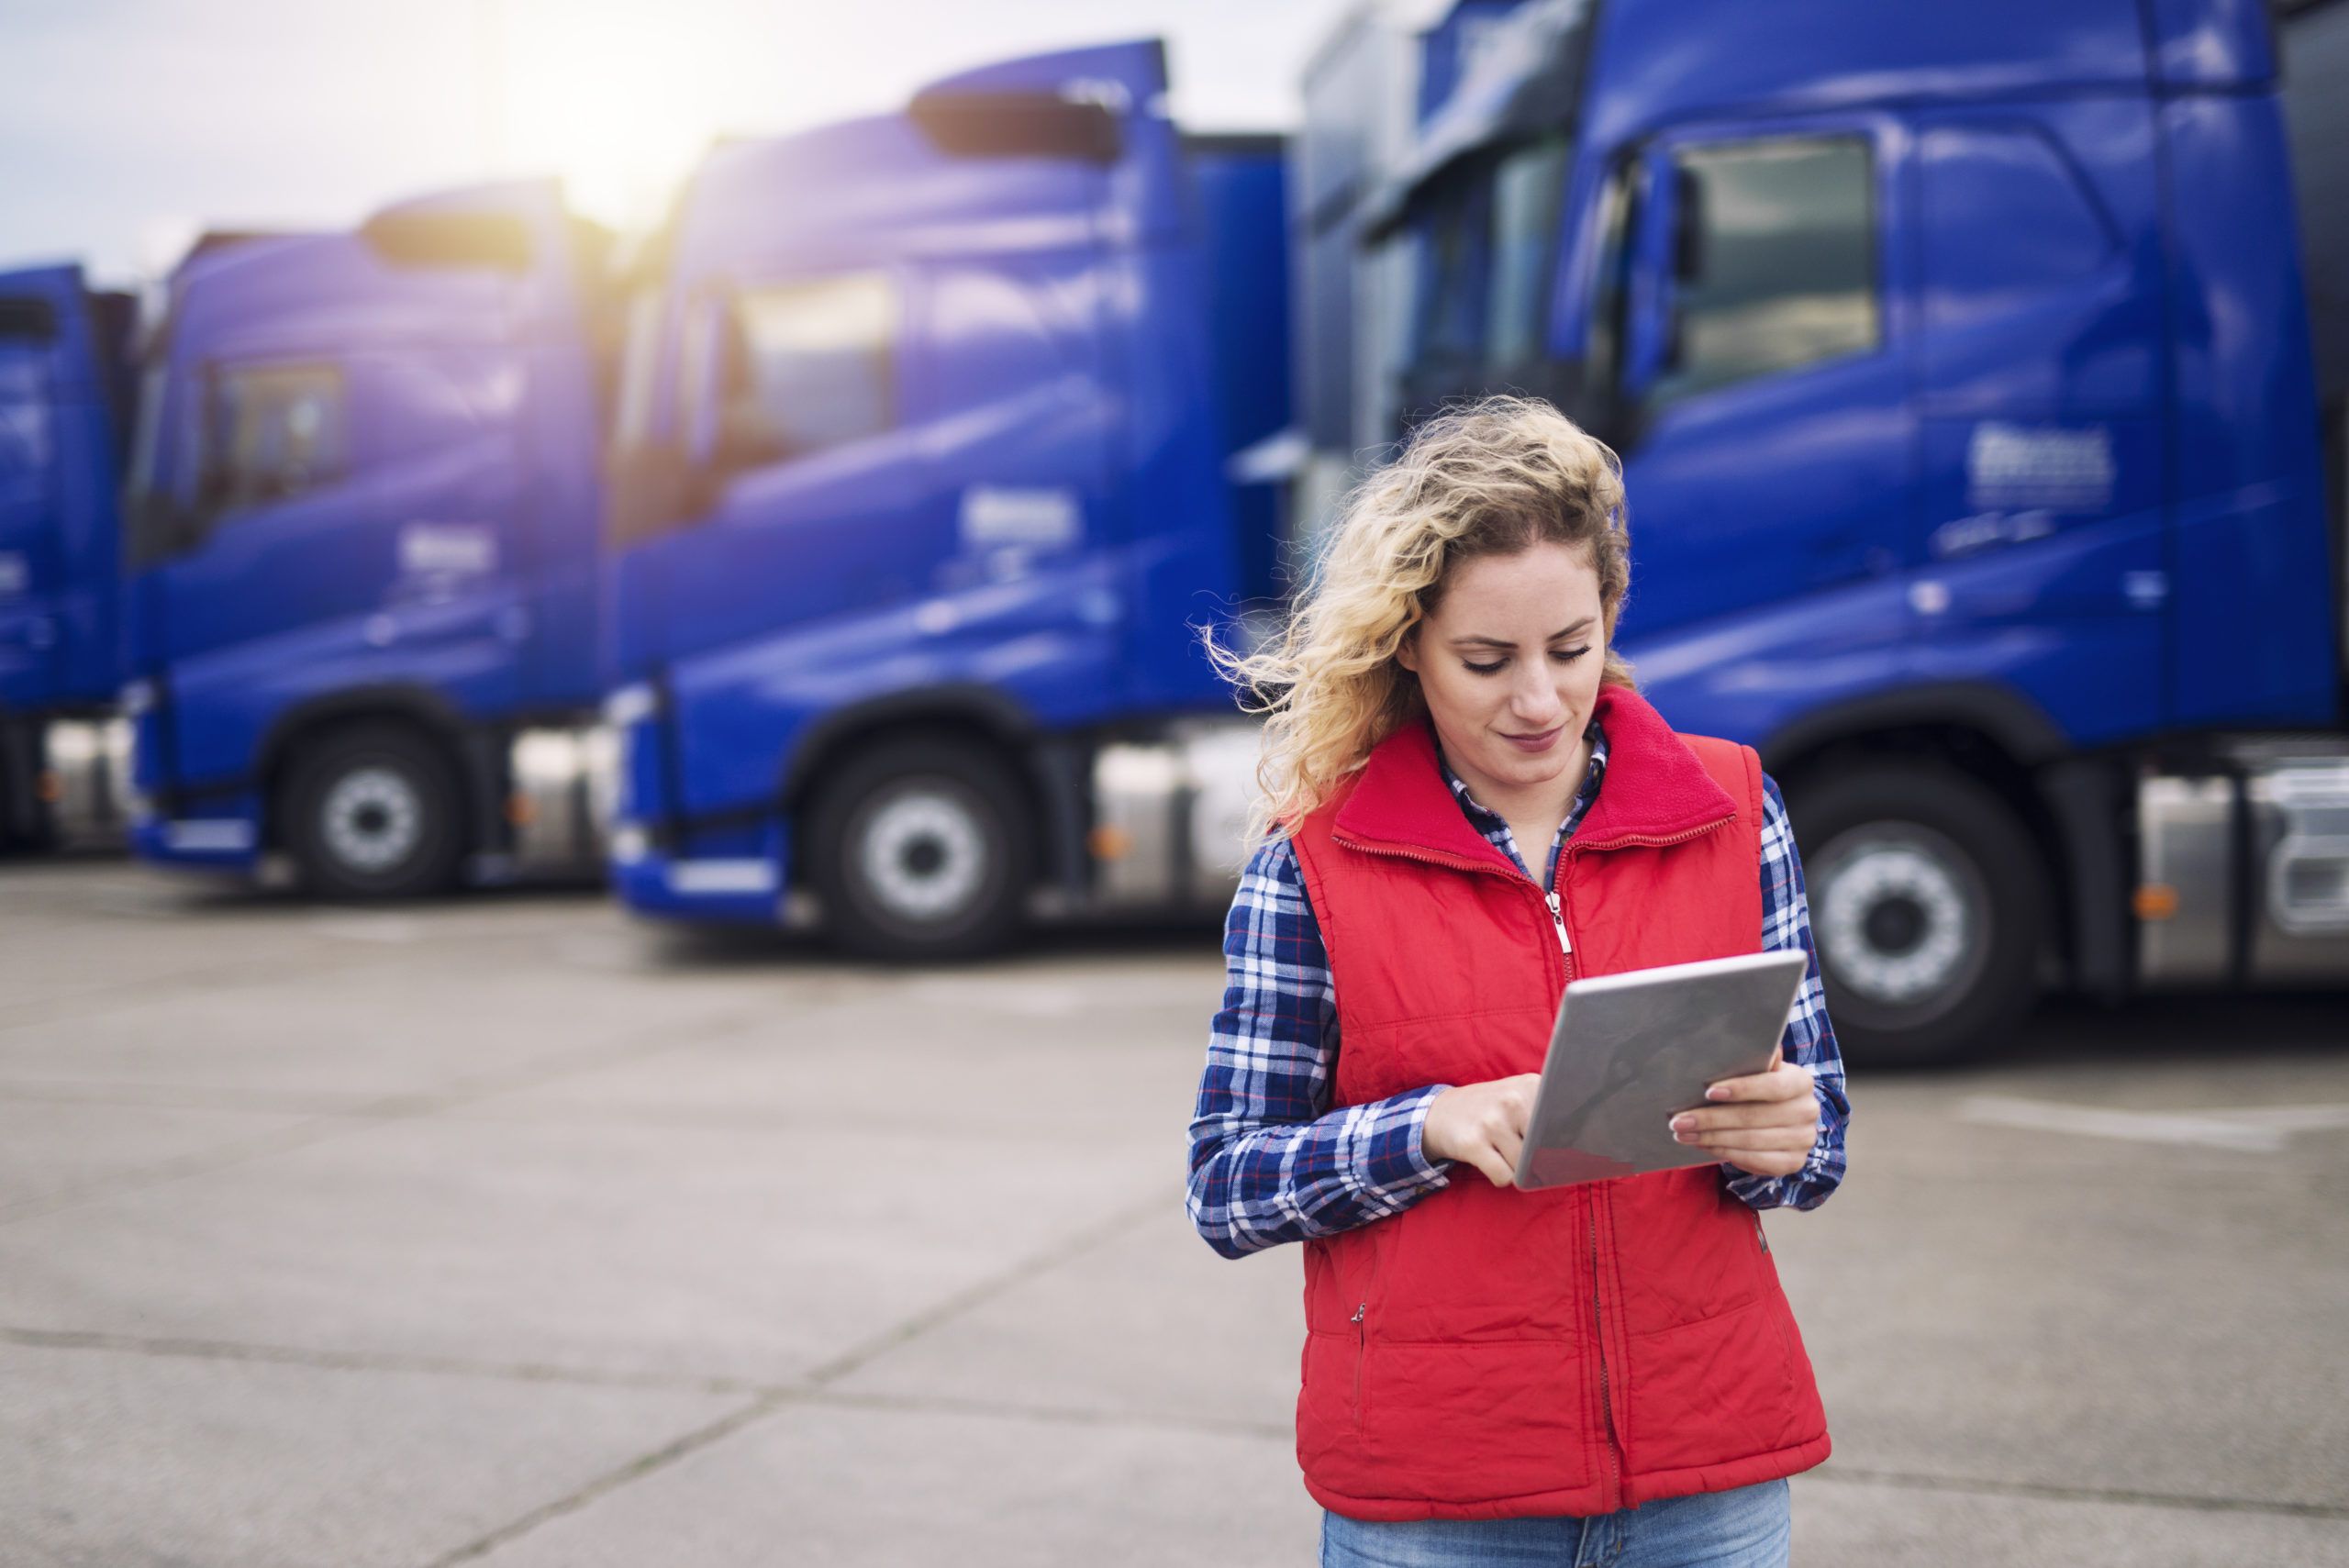 Truck driver holding tablet and checking route for new destination. In background parked truck vehicles. Transportation service.